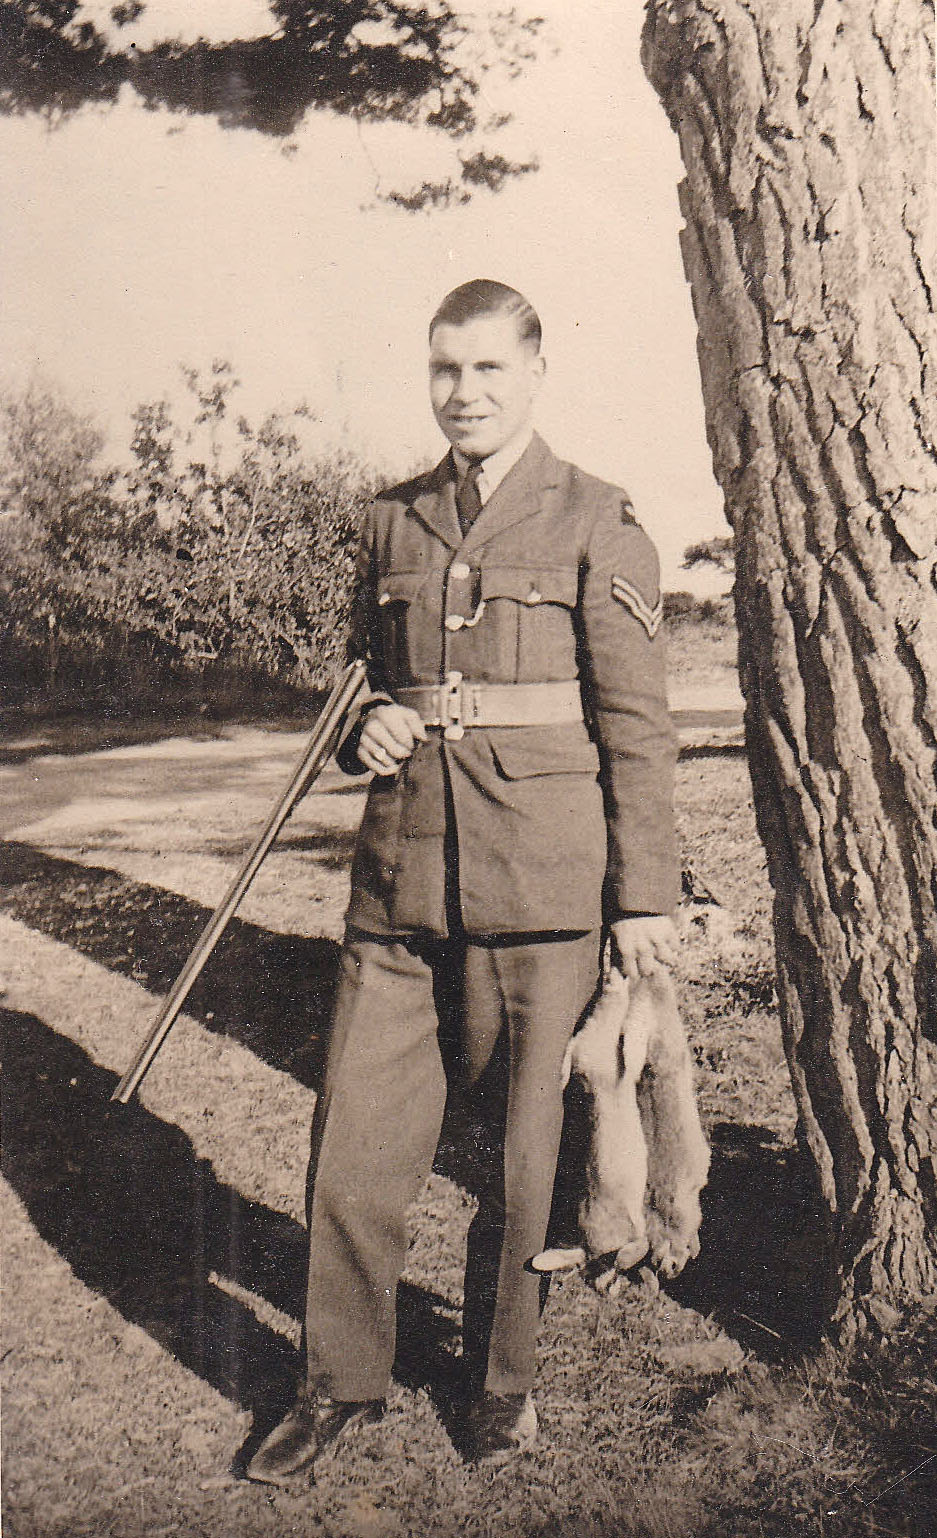 RAF Corporal Harry King RAF Military Police was stationed at Worth Matravers Sept 1940 02